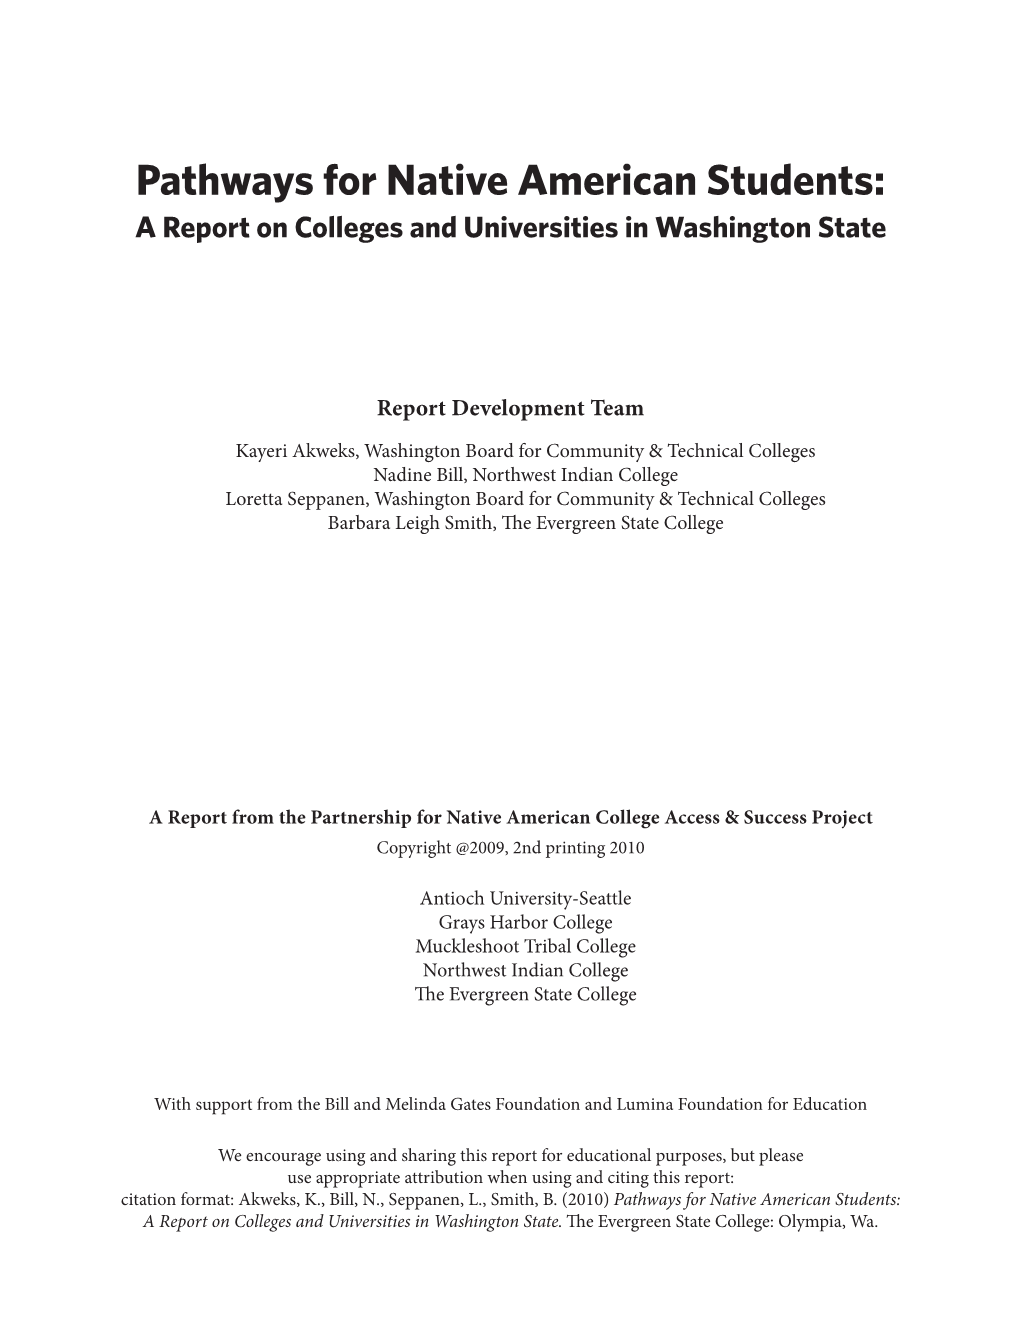 Pathways for Native American Students: a Report on Colleges and Universities in Washington State